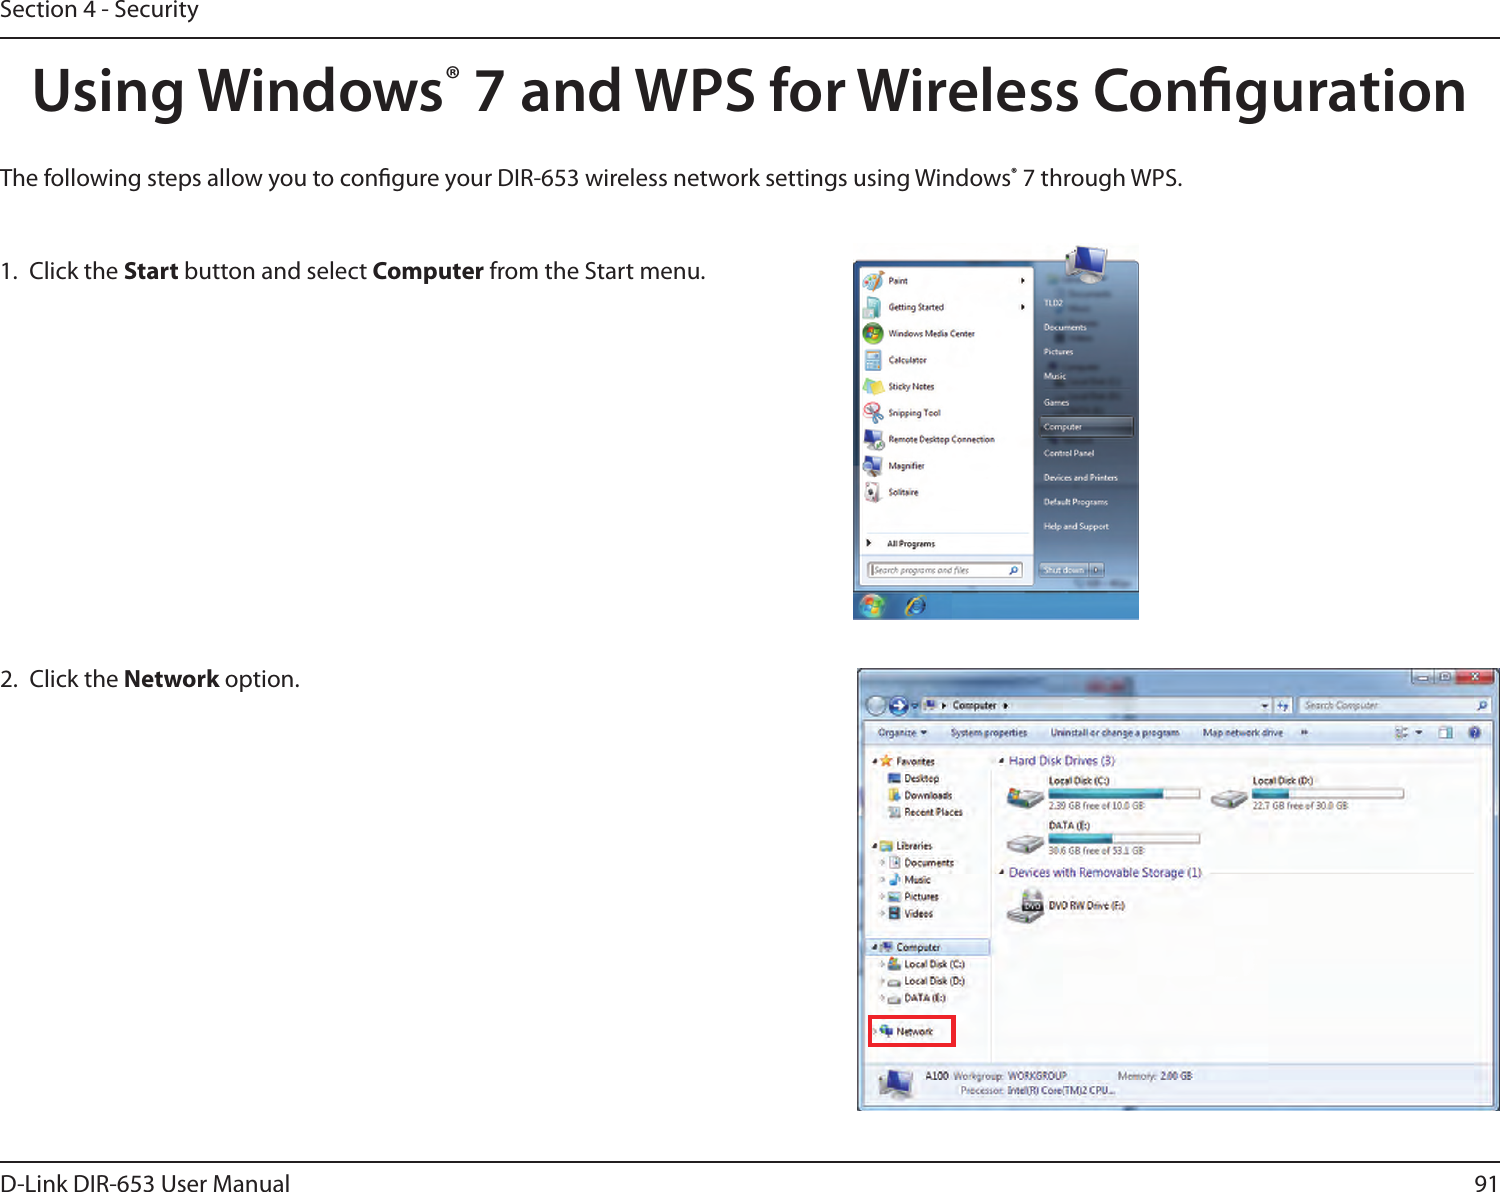 91D-Link DIR-653 User ManualSection 4 - SecurityUsing Windows® 7 and WPS for Wireless CongurationThe following steps allow you to congure your DIR-653 wireless network settings using Windows® 7 through WPS.1.  Click the Start button and select Computer from the Start menu.2.  Click the Network option.